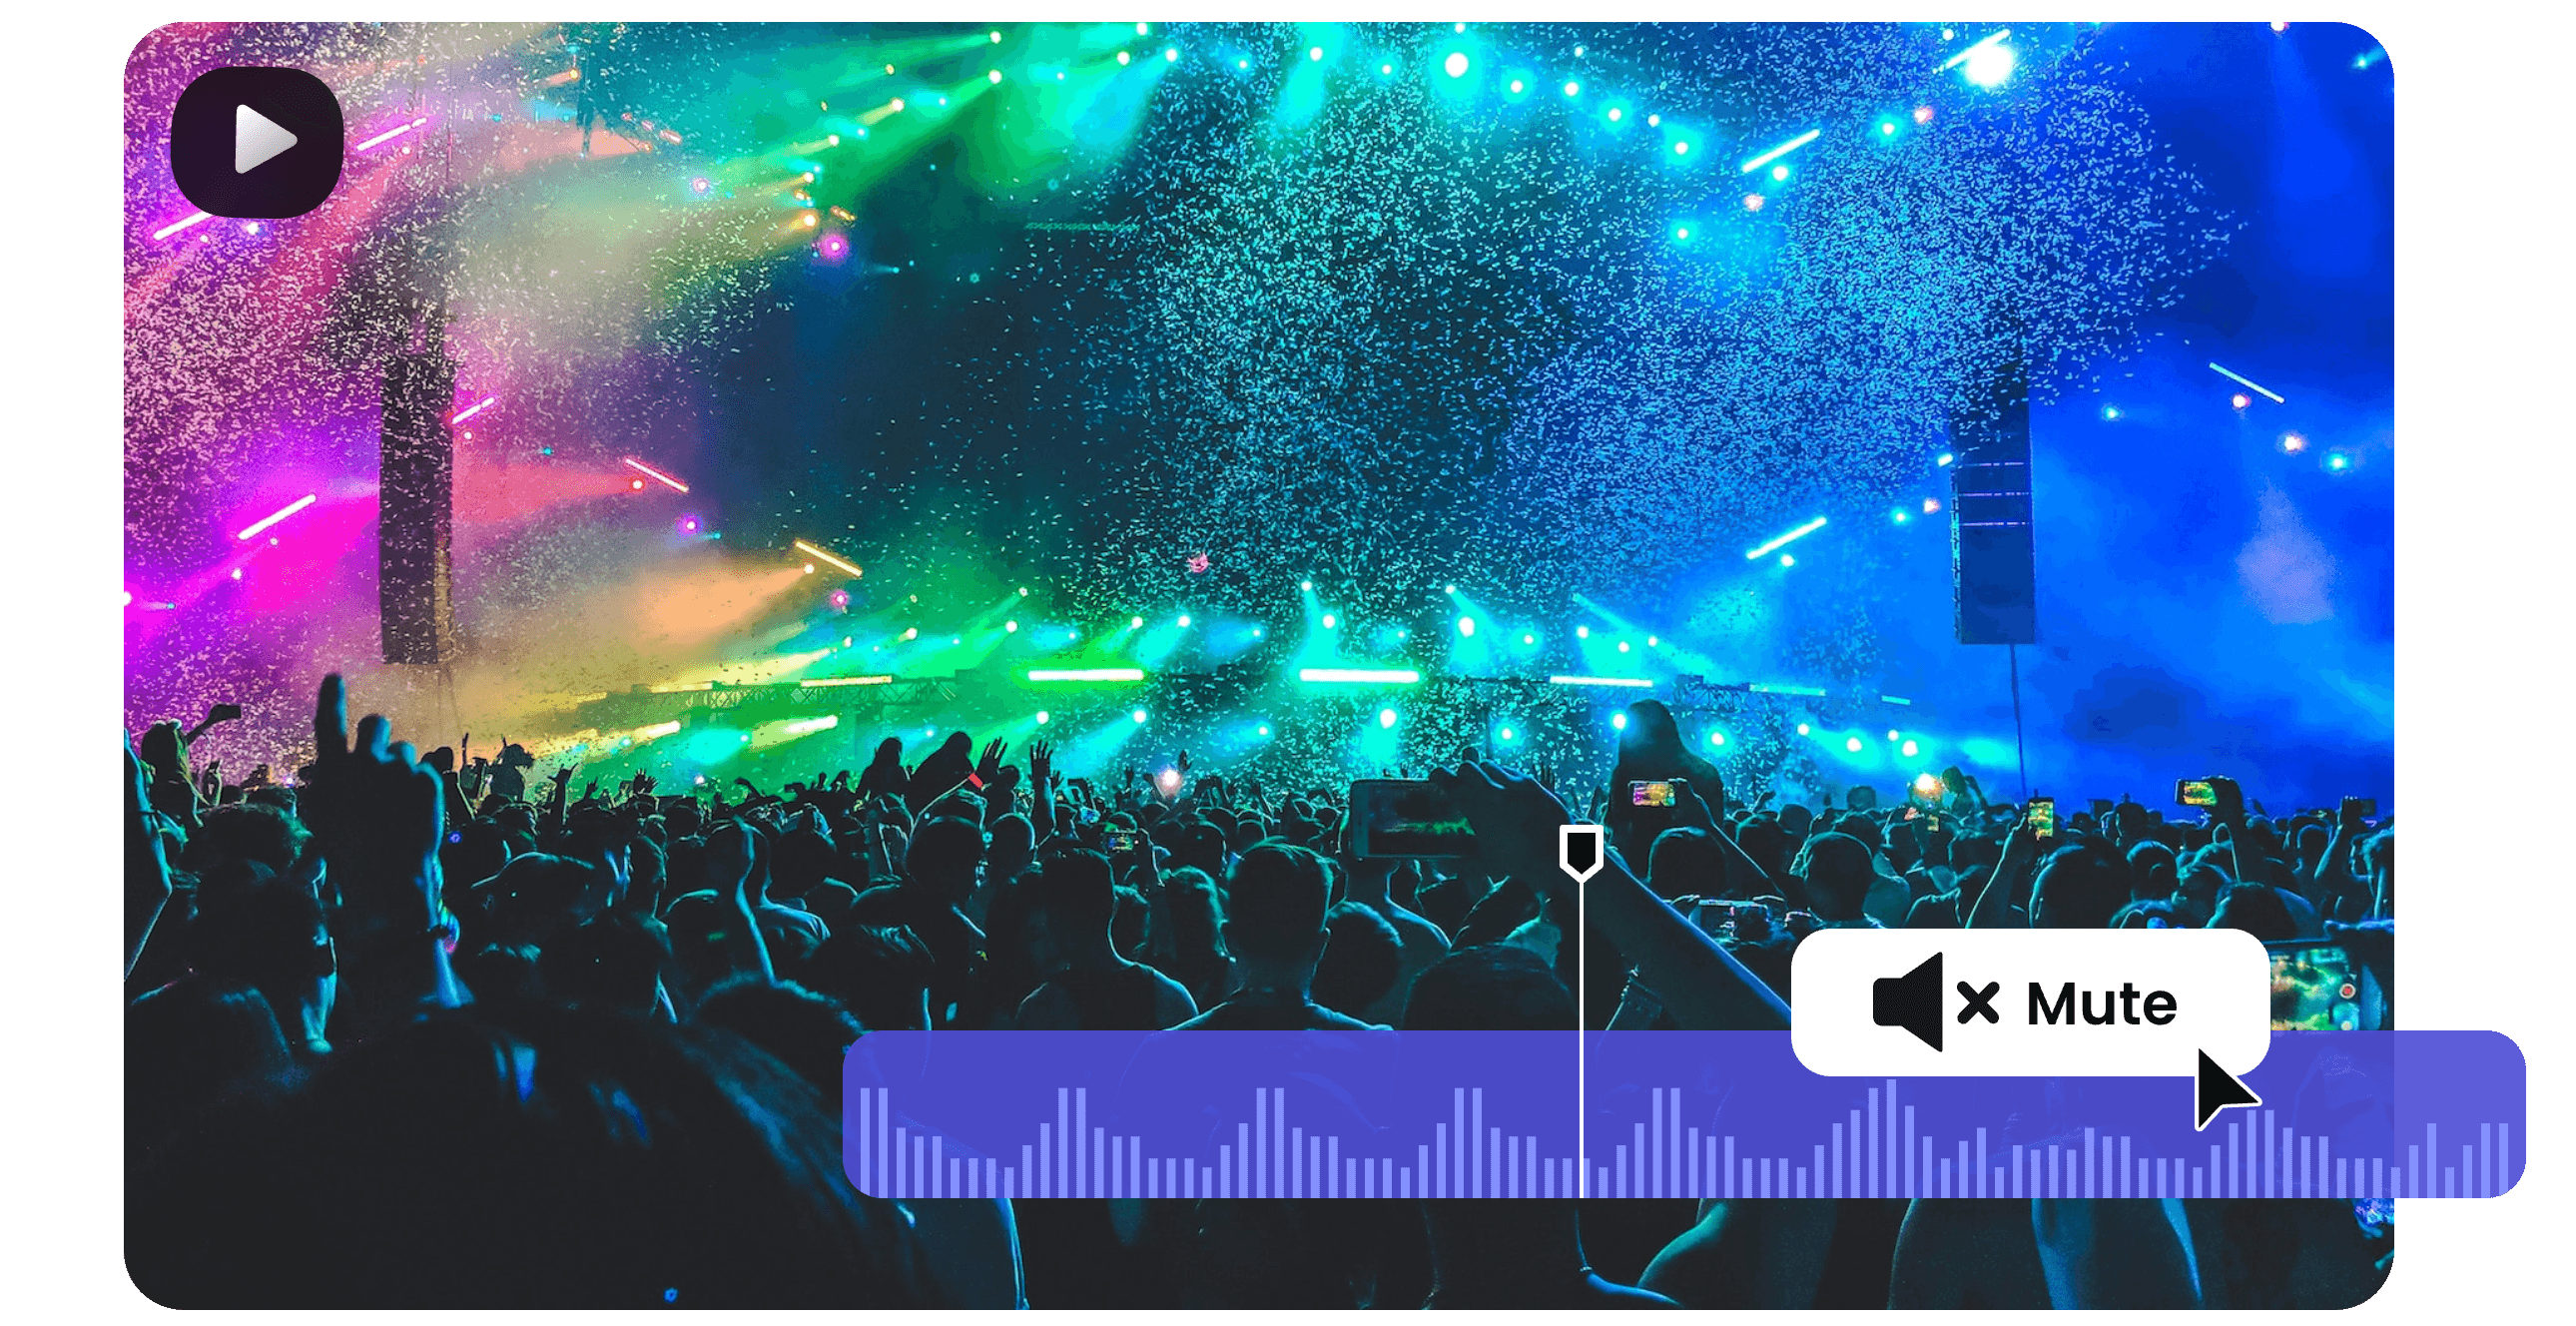 Mute the audio in a livehouse video with one click